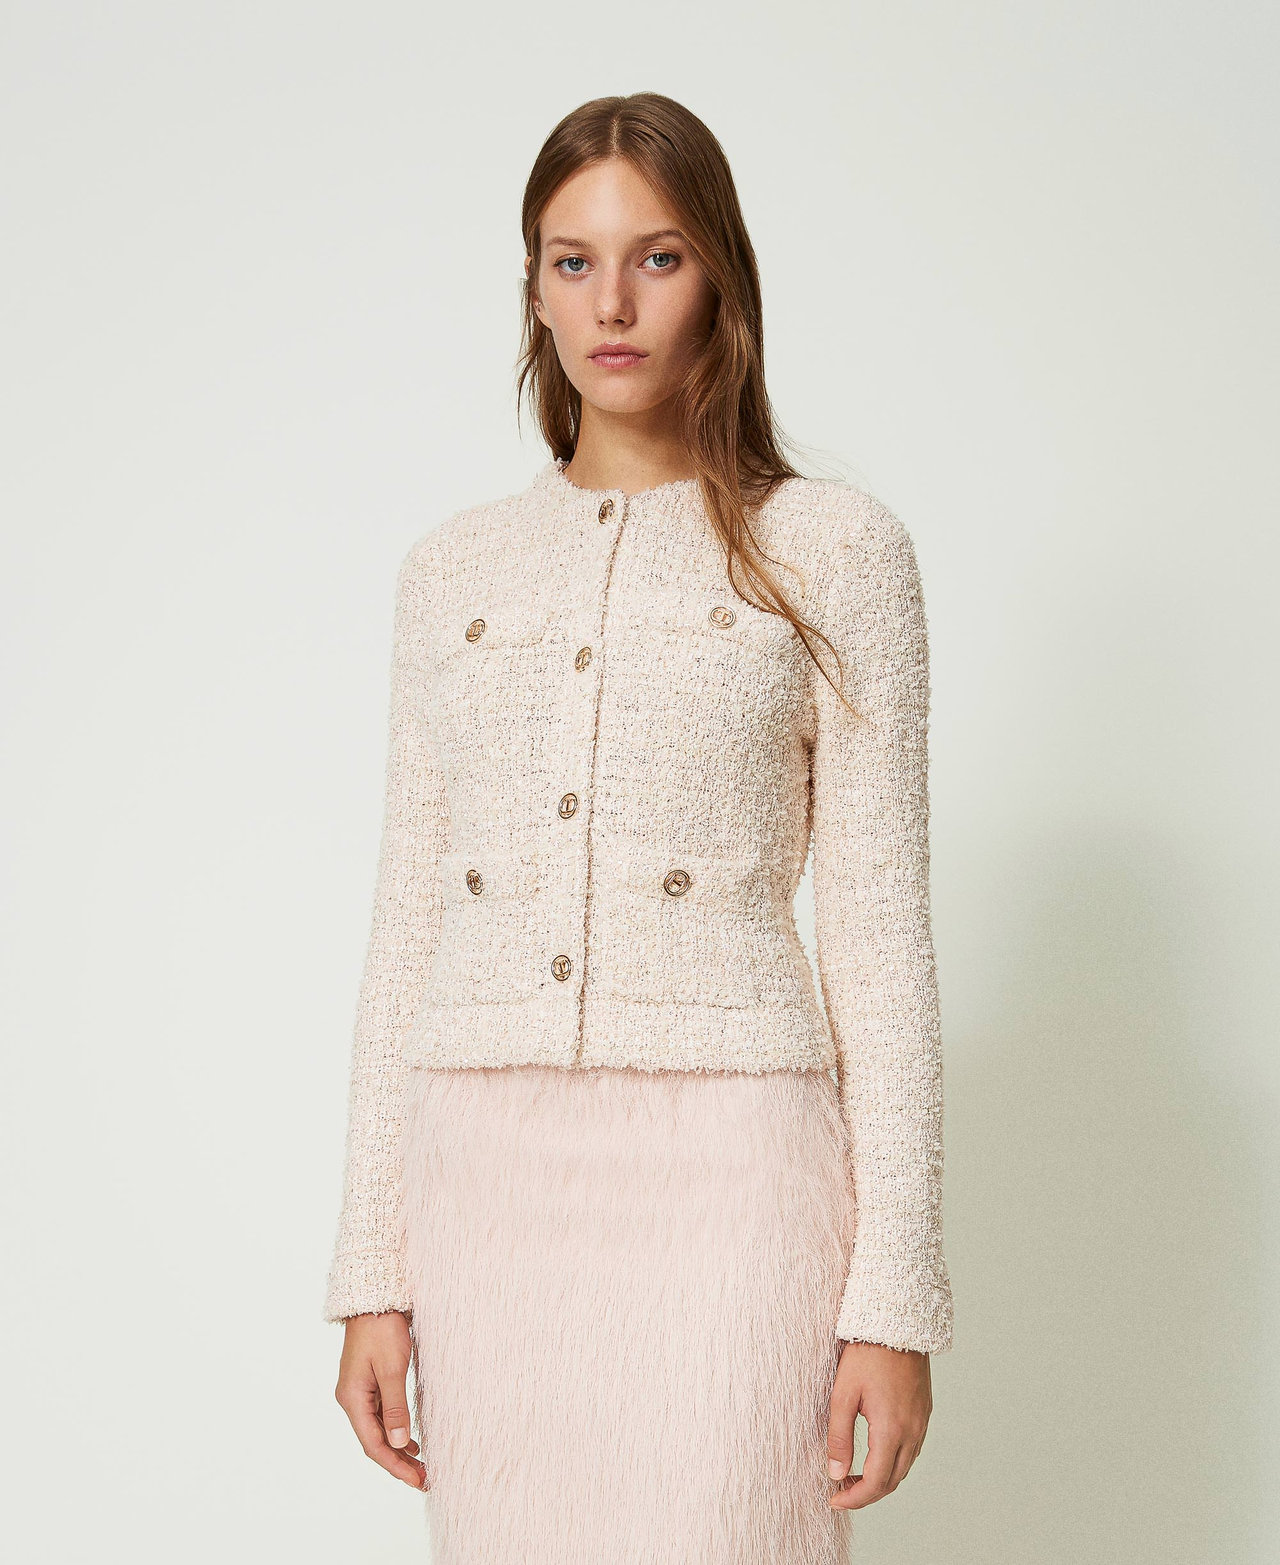 Giacca in maglia bouclé con bottoni Oval T Jacquard Boucle’ Cupcake Pink Donna 241TP3601-02